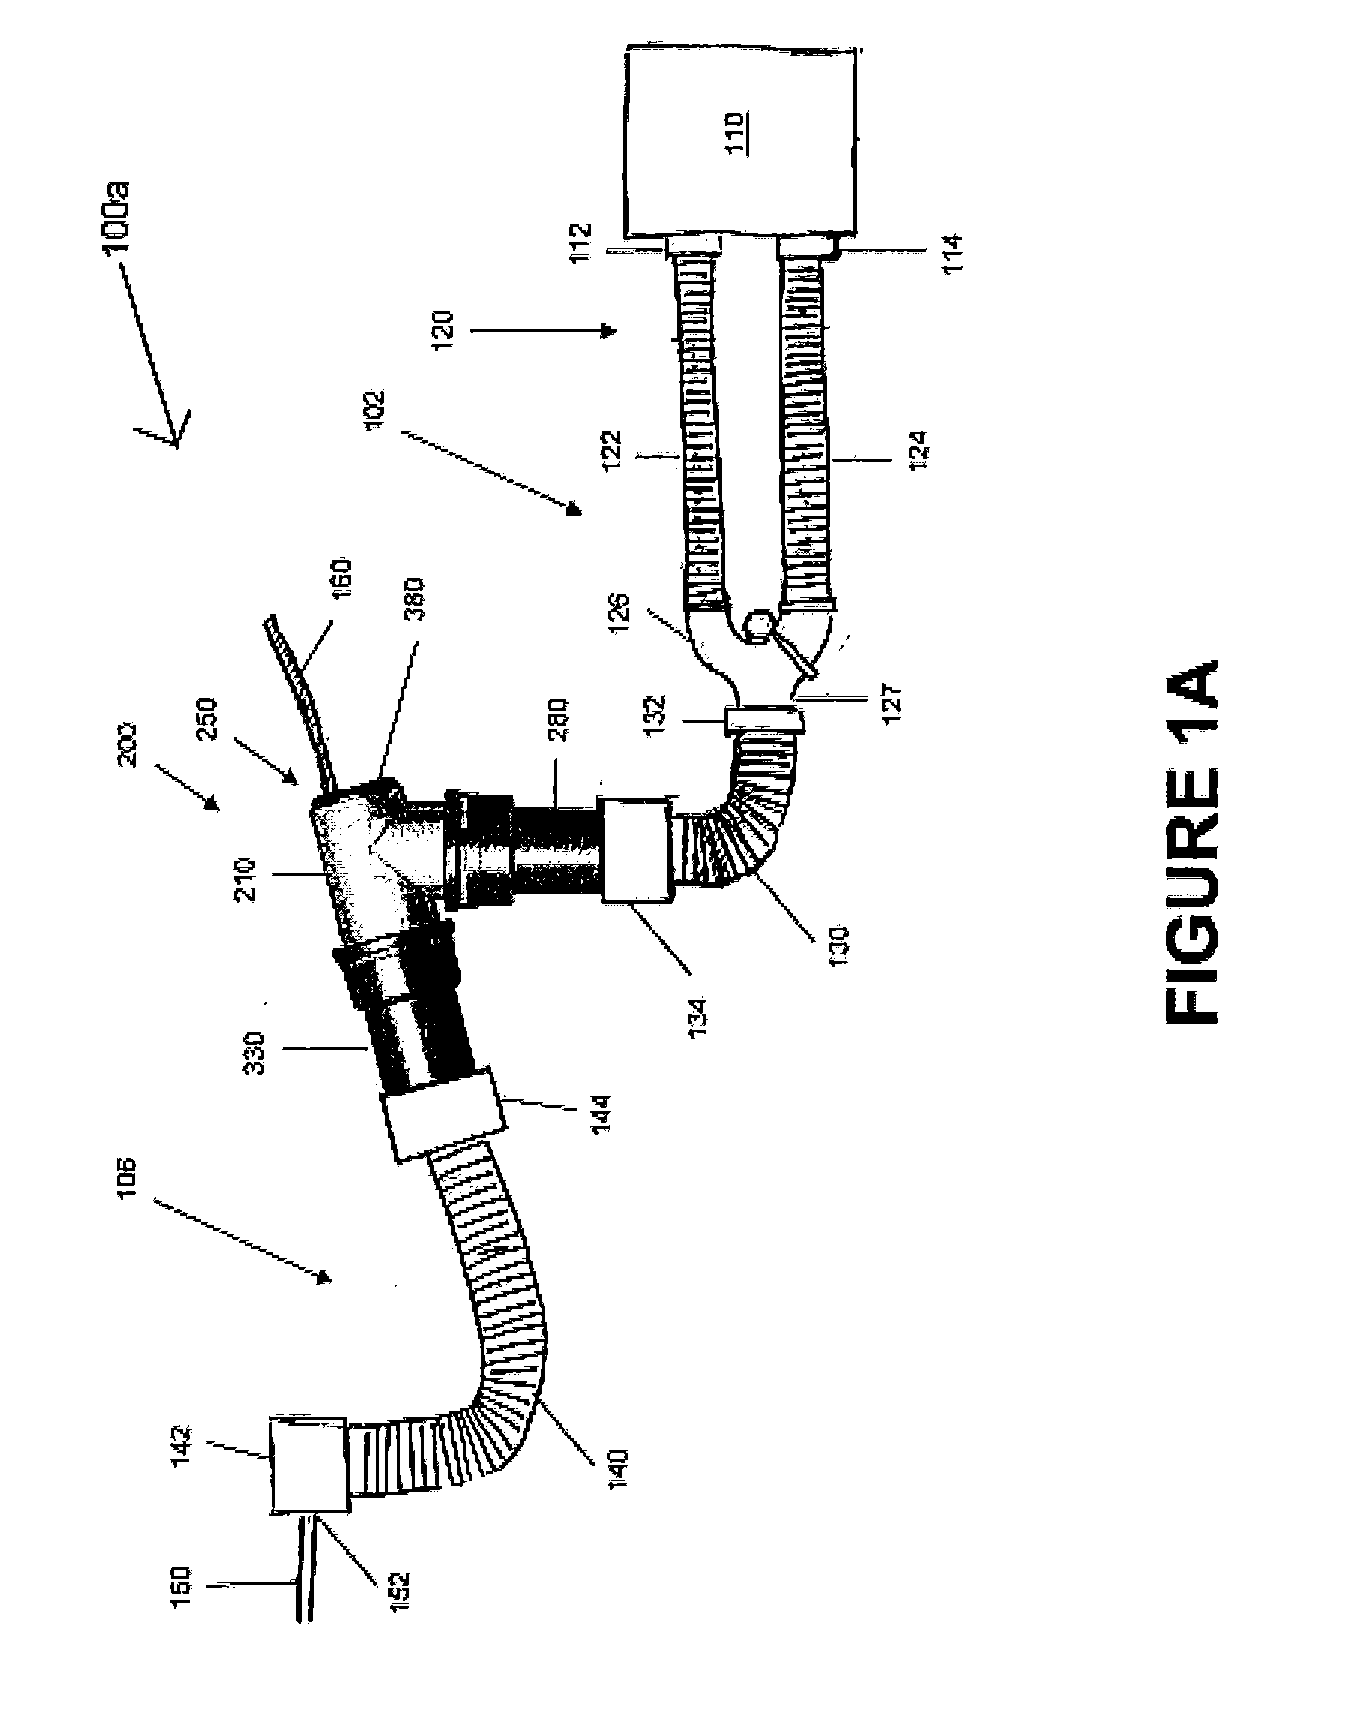 Catheter mount with suction port